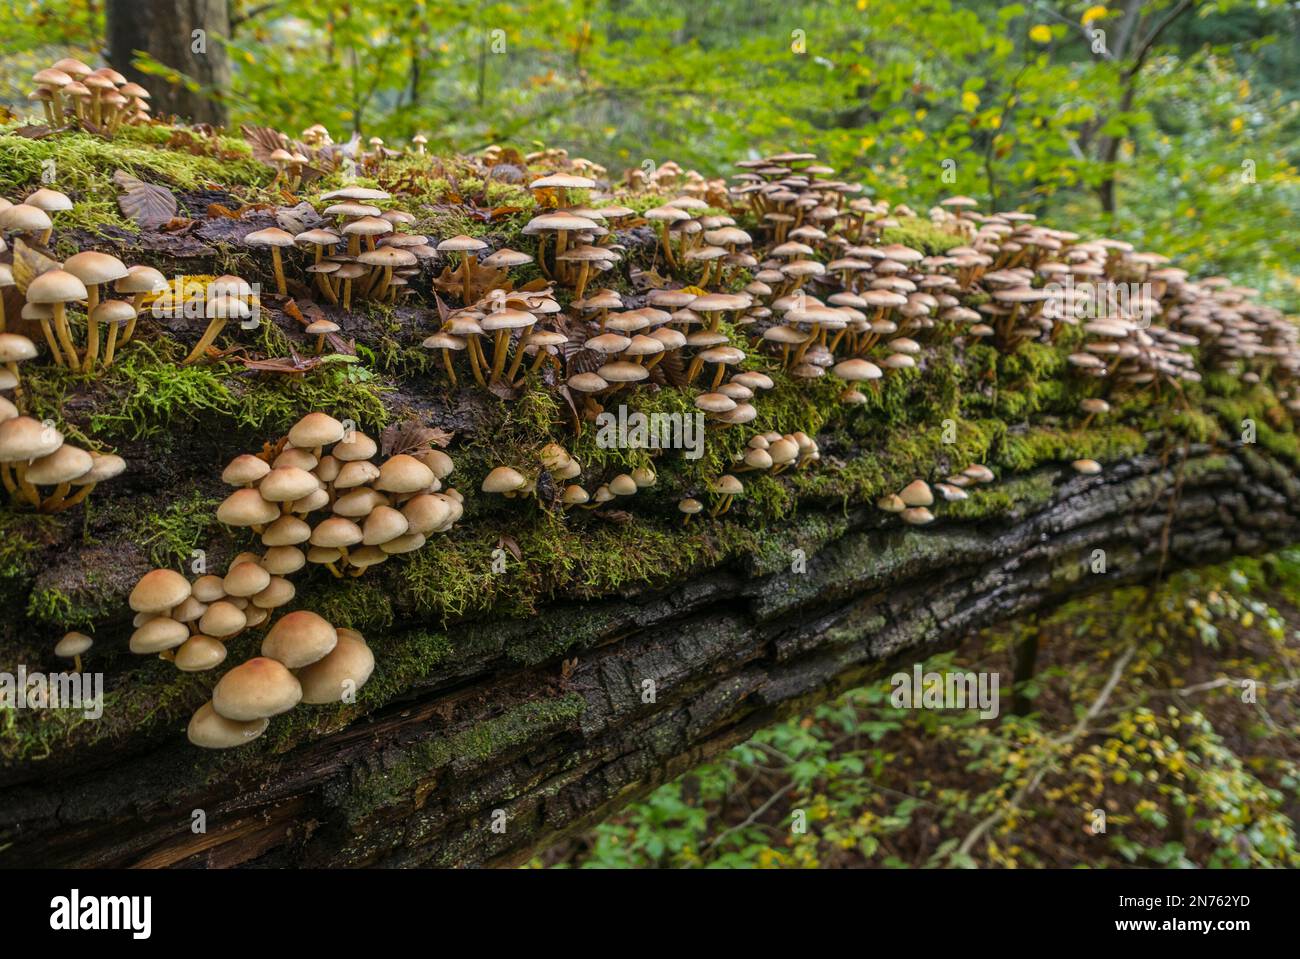 Germany, Hesse, Frankfurt city forest, deciduous forest in autumn, mushrooms, Hypholoma capnoides, conifer tuft, edible Stock Photo